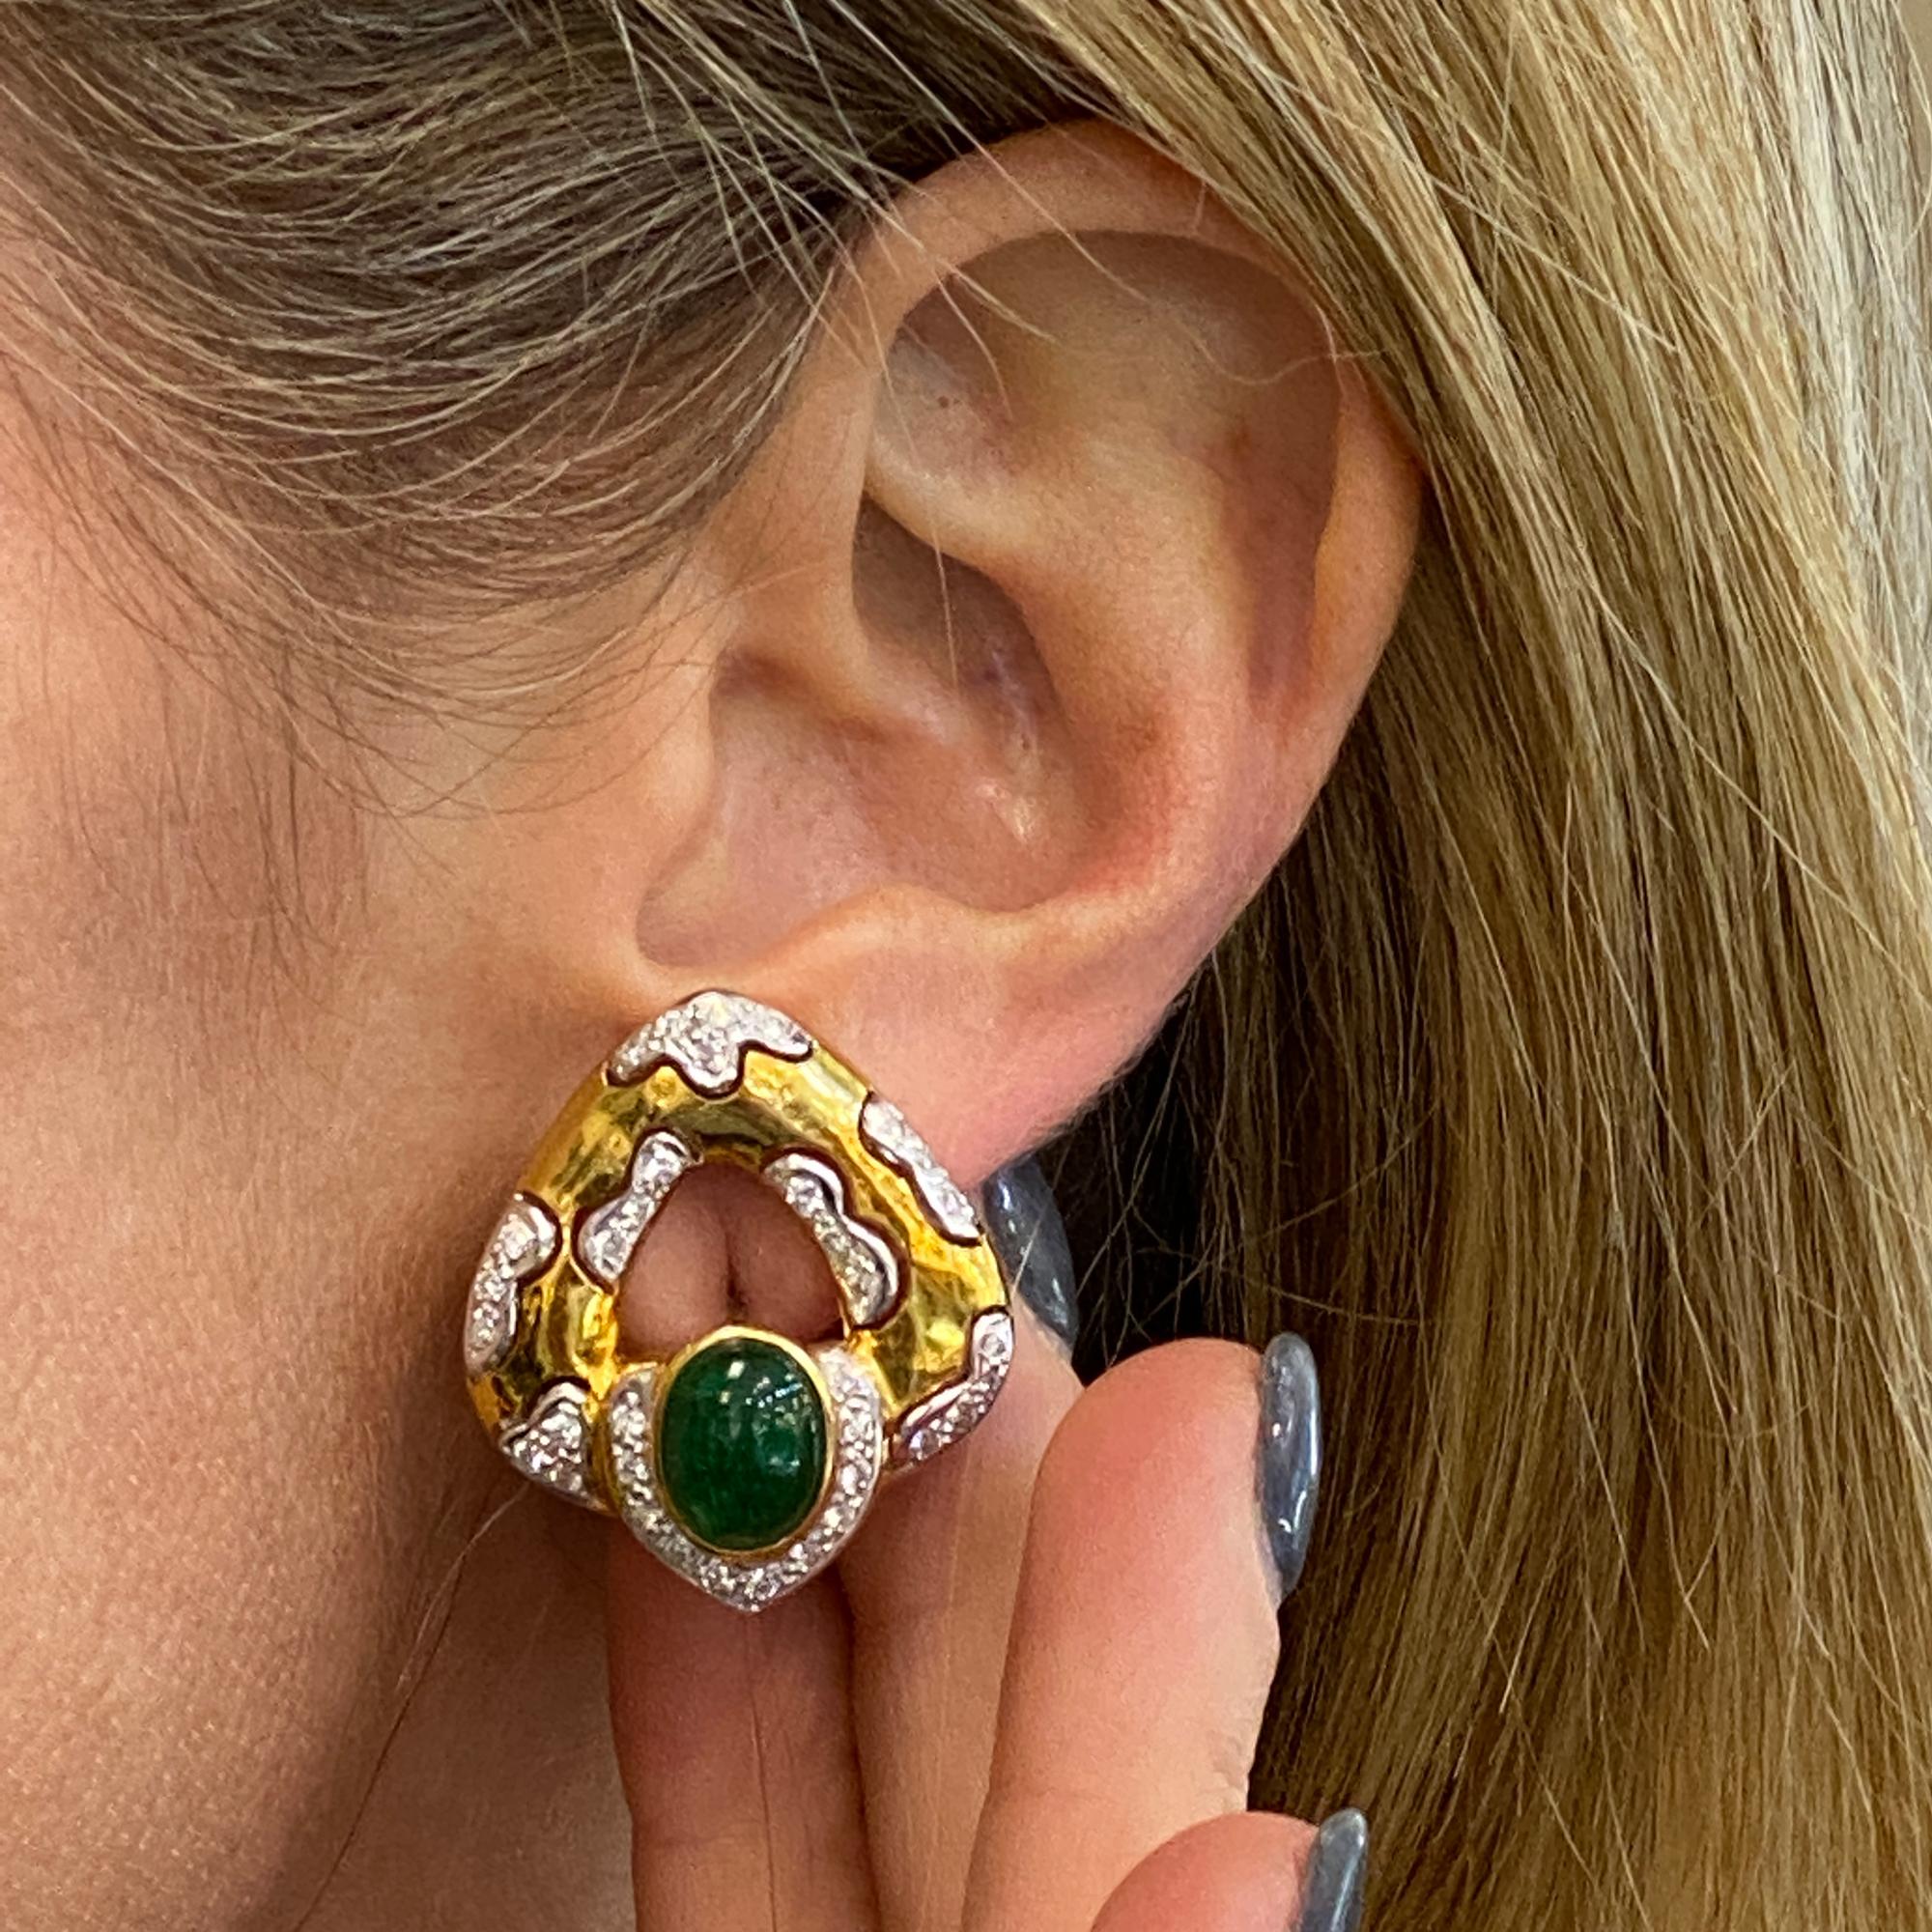 Diamond and emerald triangular shaped earrings are circa 1980's. The earrings are fashioned in 18 karat yellow gold and feature 2 cabochon emeralds weighing approximately 4.00 carat total weight, and high quality round brilliant cut diamonds